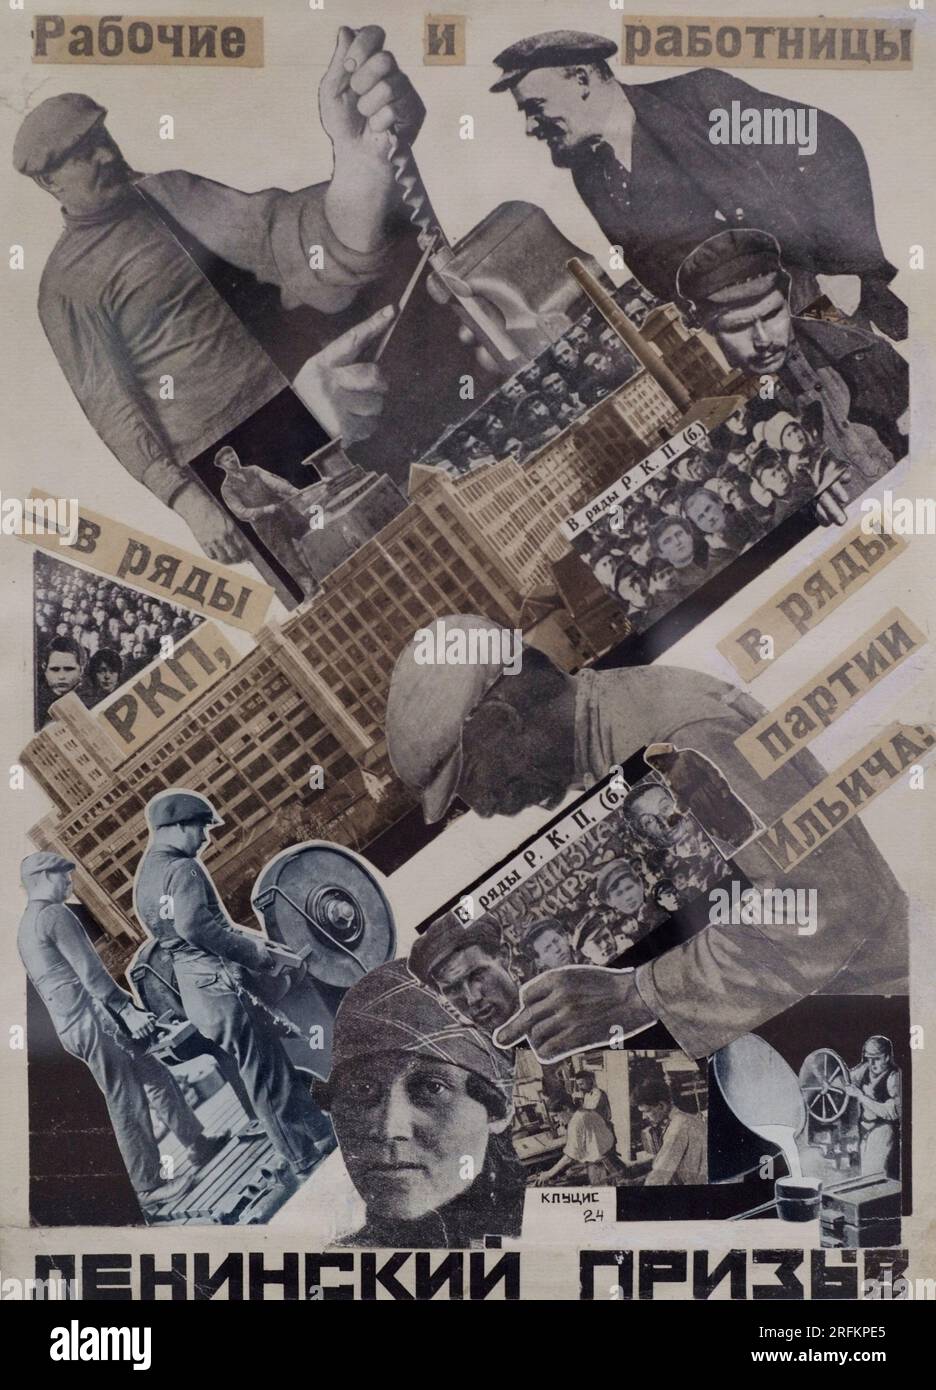 Gustav Klutsis (1895-1938). Russian-Latvian artist. The Lenin Enrolment. Male and female workers join the ranks of the CPR - the party of Ilyich!. Design for a poster, 1924. Photomontage, collage and gouache on paper, 33,8 x 24,6 cm. Latvian National Museum of Art. Riga. Latvia. Stock Photo